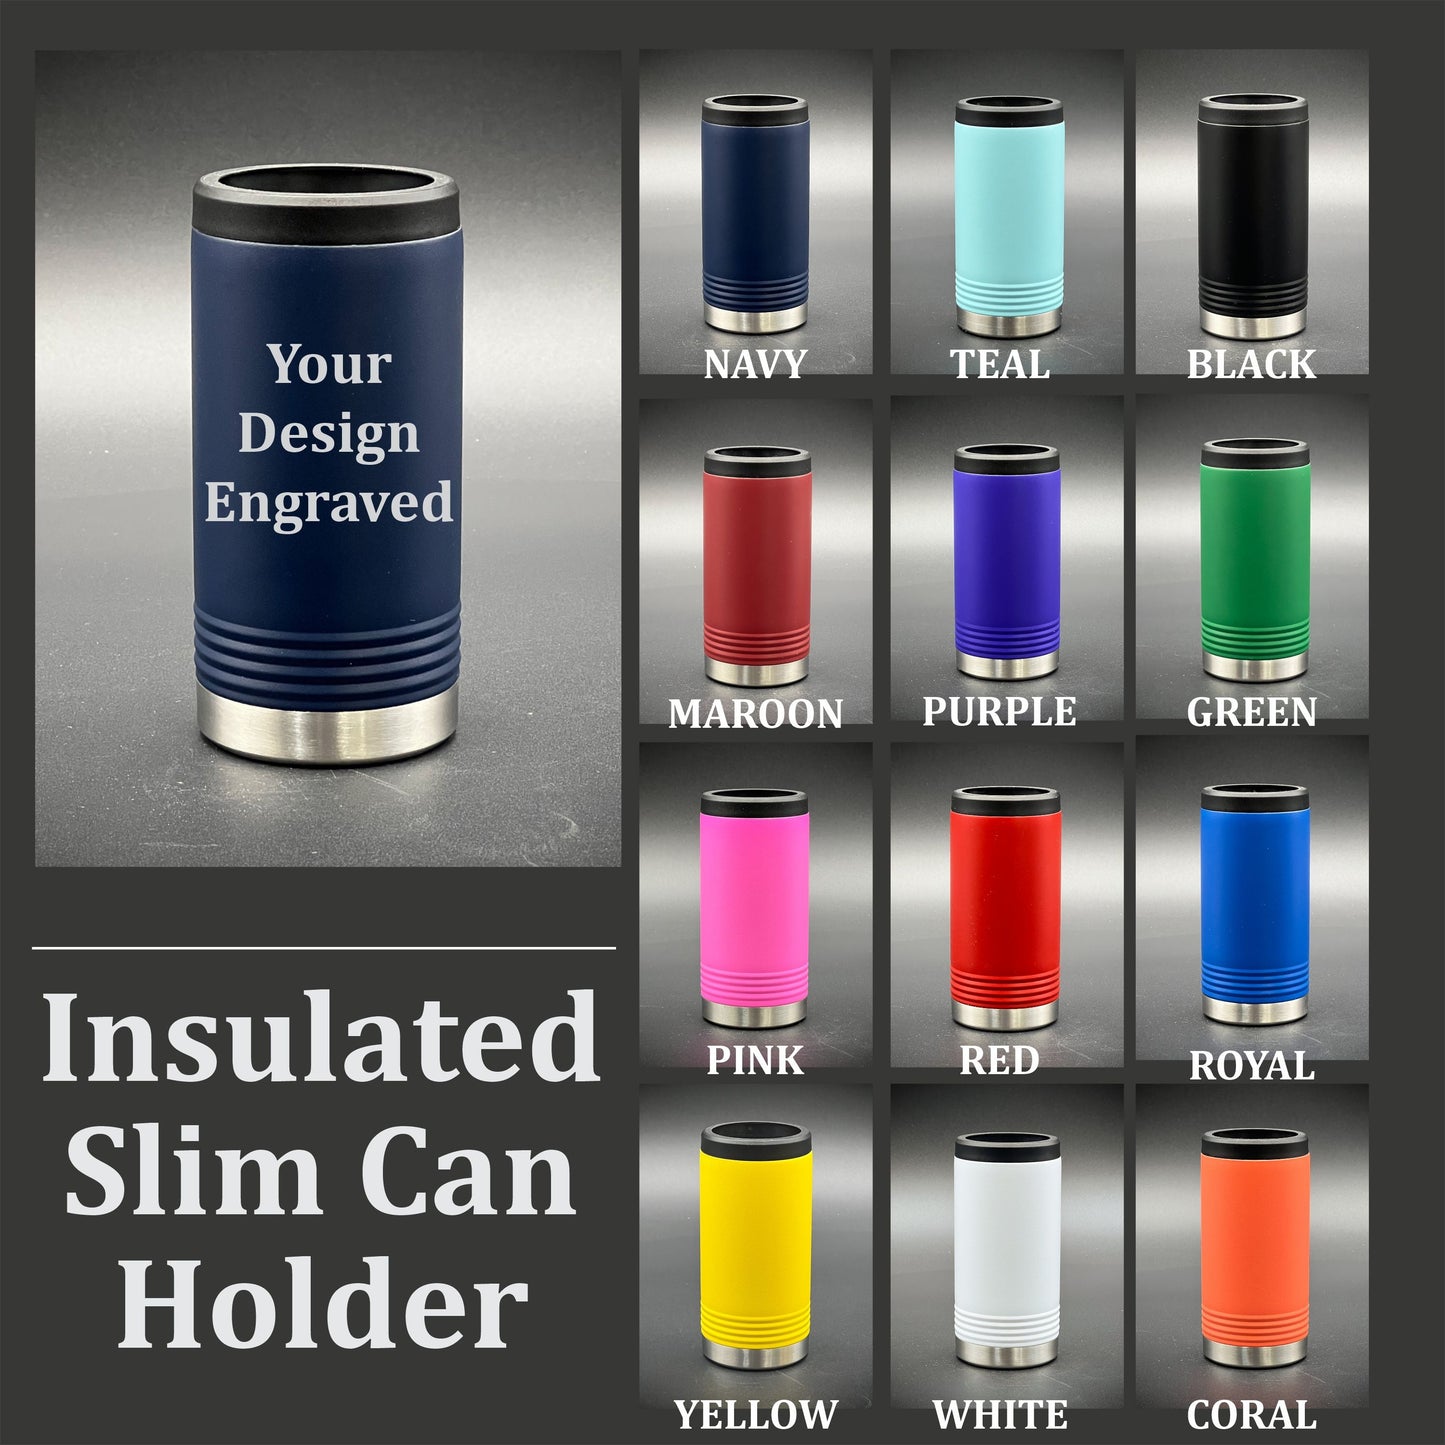 Trees - Insulated Slim Can Holder